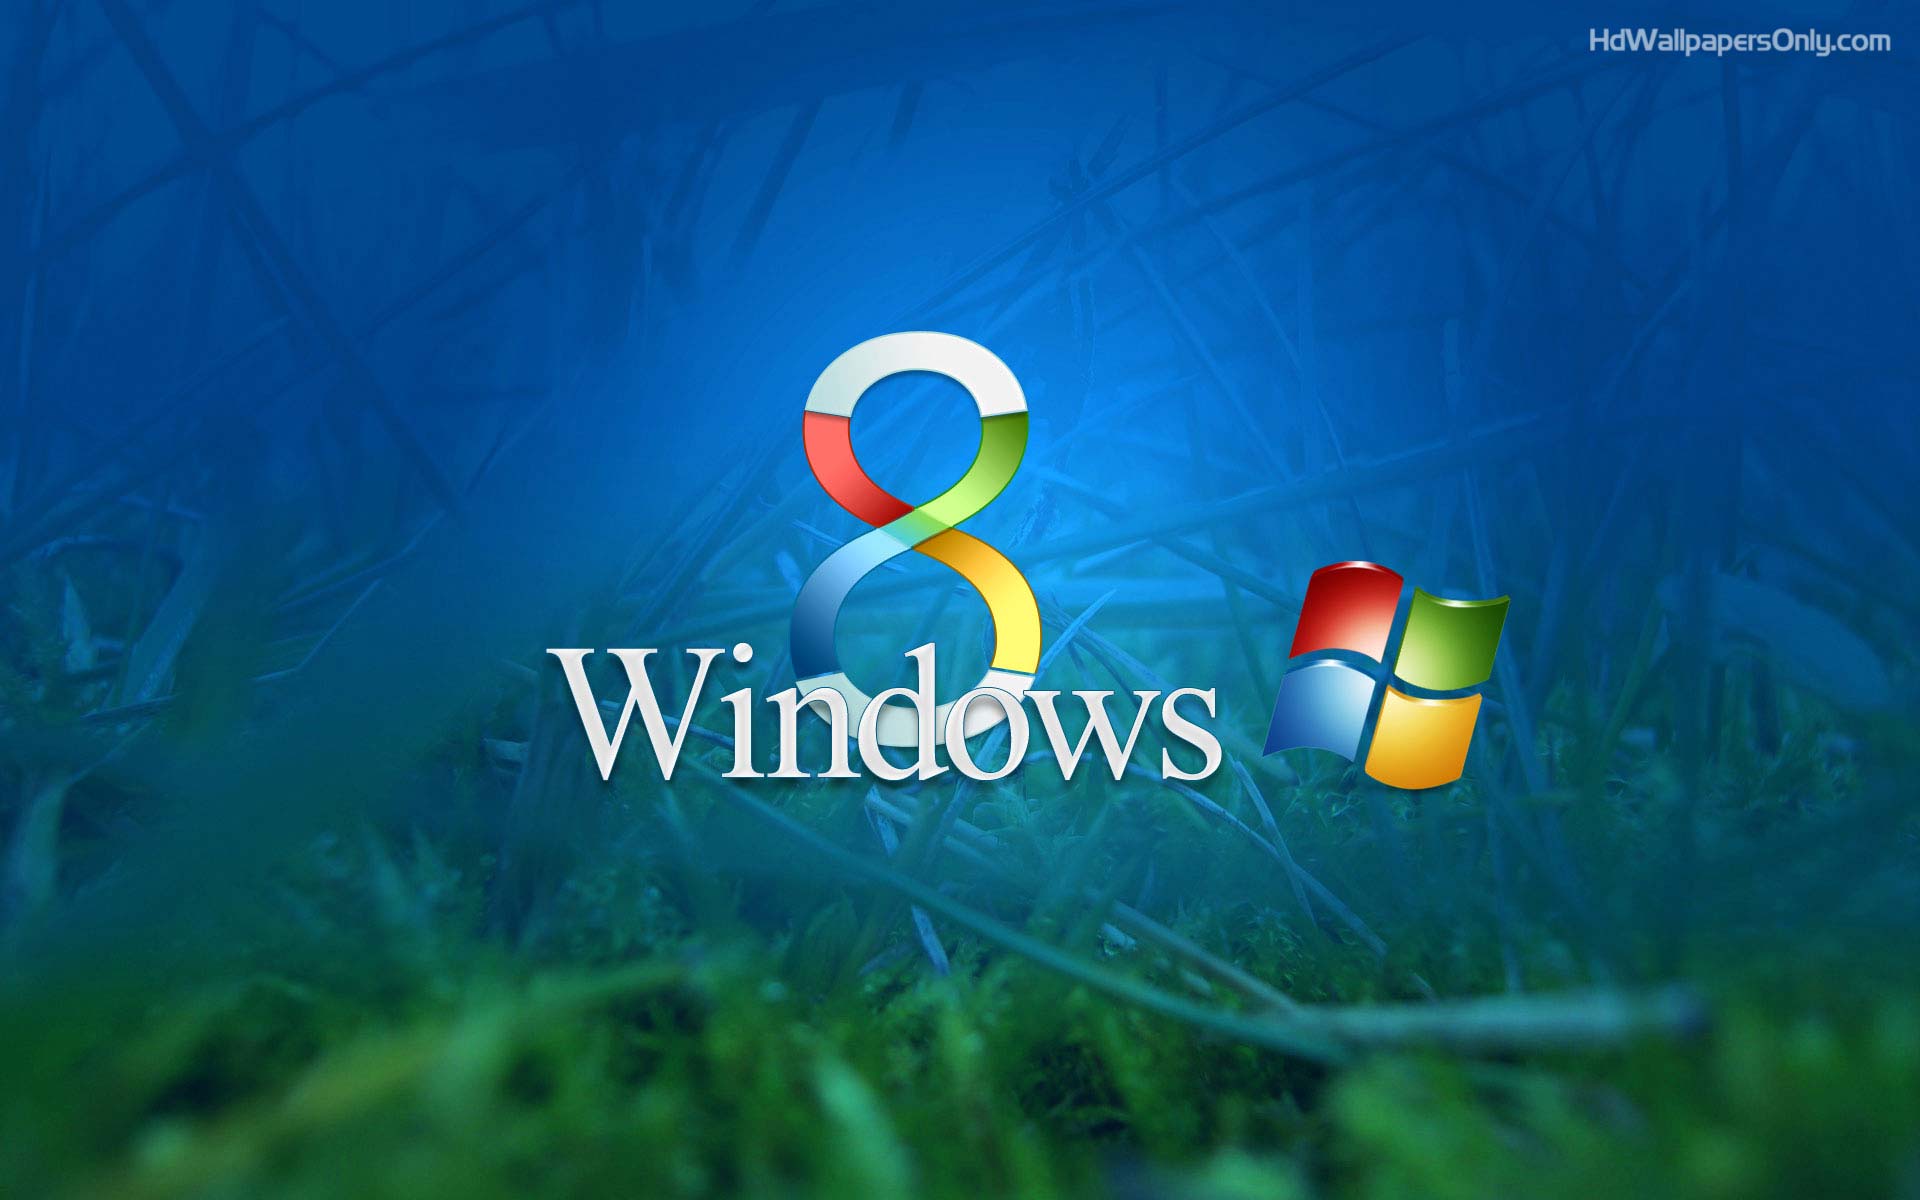 Windows Wallpapers Download Group (78+)